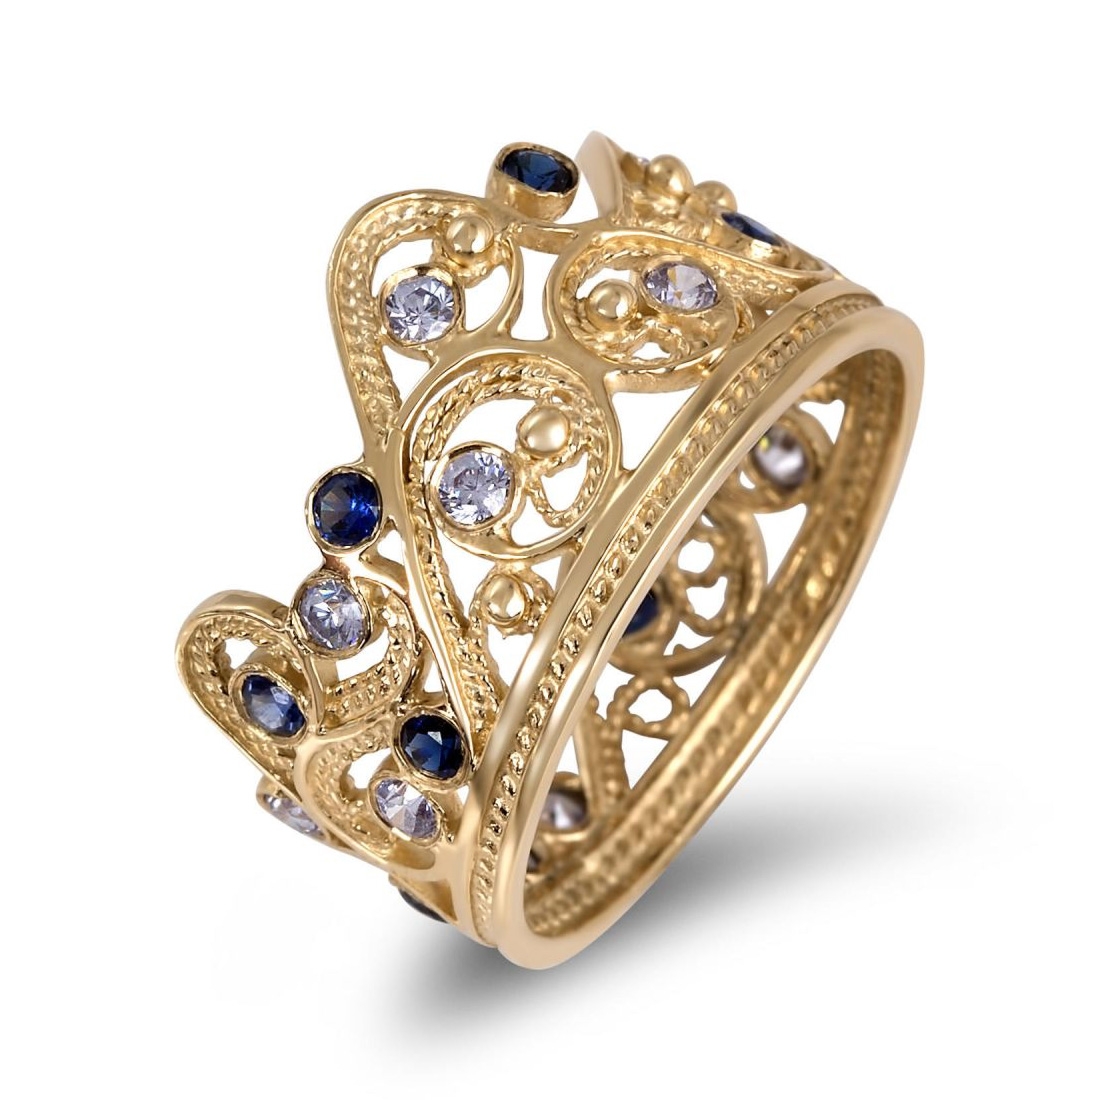 14K Gold Filigree Ring with Sapphires and Lavender - 1